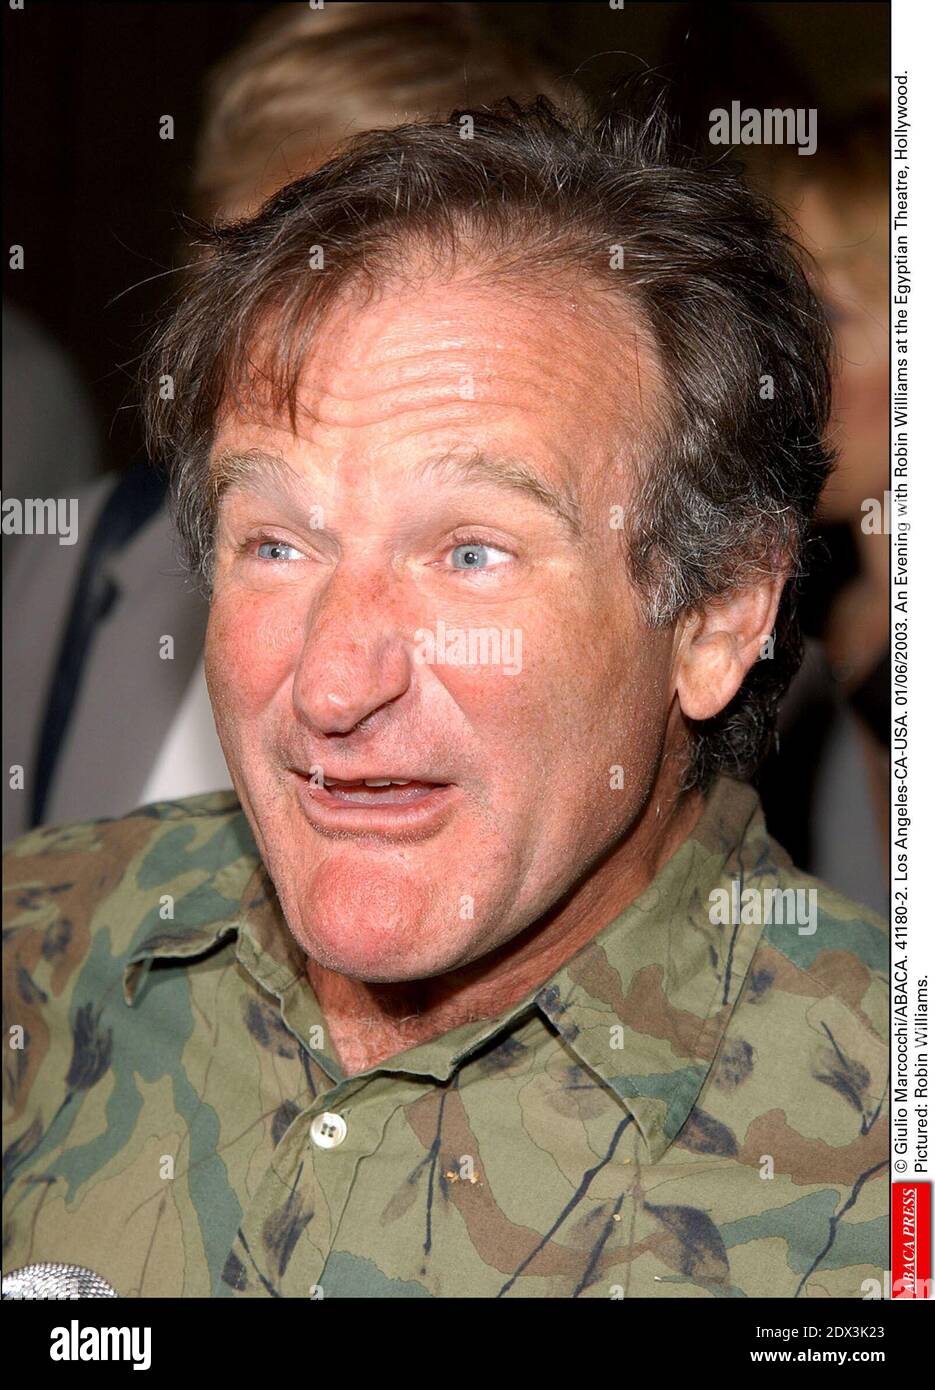 US actor Robin Williams has been found dead, aged 63, in an apparent suicide, California police say Monday August 11, 2014. Marin County Police said he was pronounced dead at his home shortly after officials responded to an emergency call around noon local time. Williams was famous for films such as Good Morning Vietnam and Dead Poets Society and won an Oscar for his role in Good Will Hunting; File photo : © Giulio Marcocchi/ABACA. 41180-2. Los Angeles-CA-USA. 01/06/2003. An evening at The American Cinematheque with Robin William for his film One Hour Photo. Pictured: Robin Williams. Stock Photo